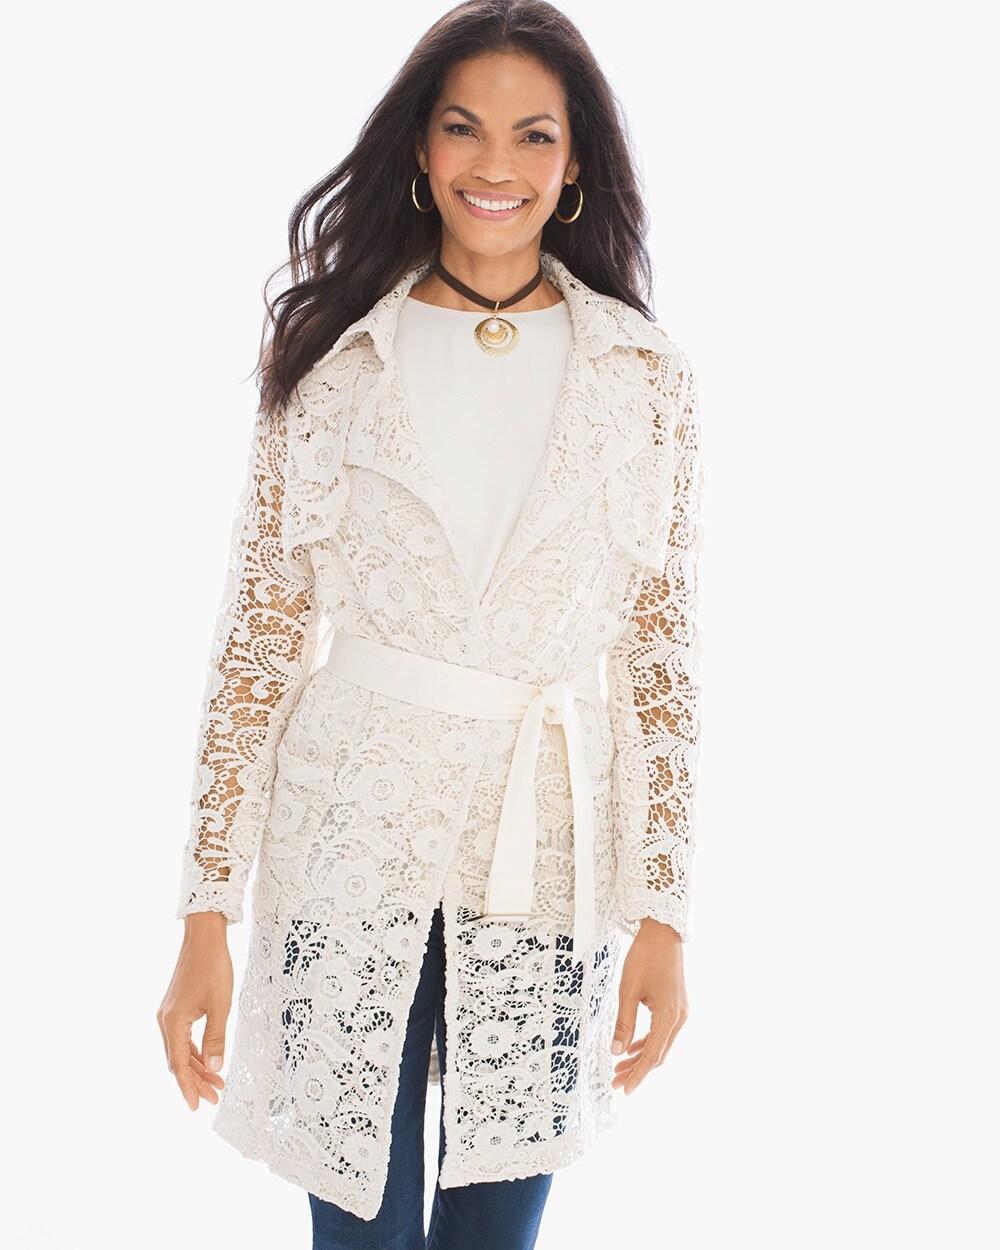 Collectibles Lace Limited Trench Jacket